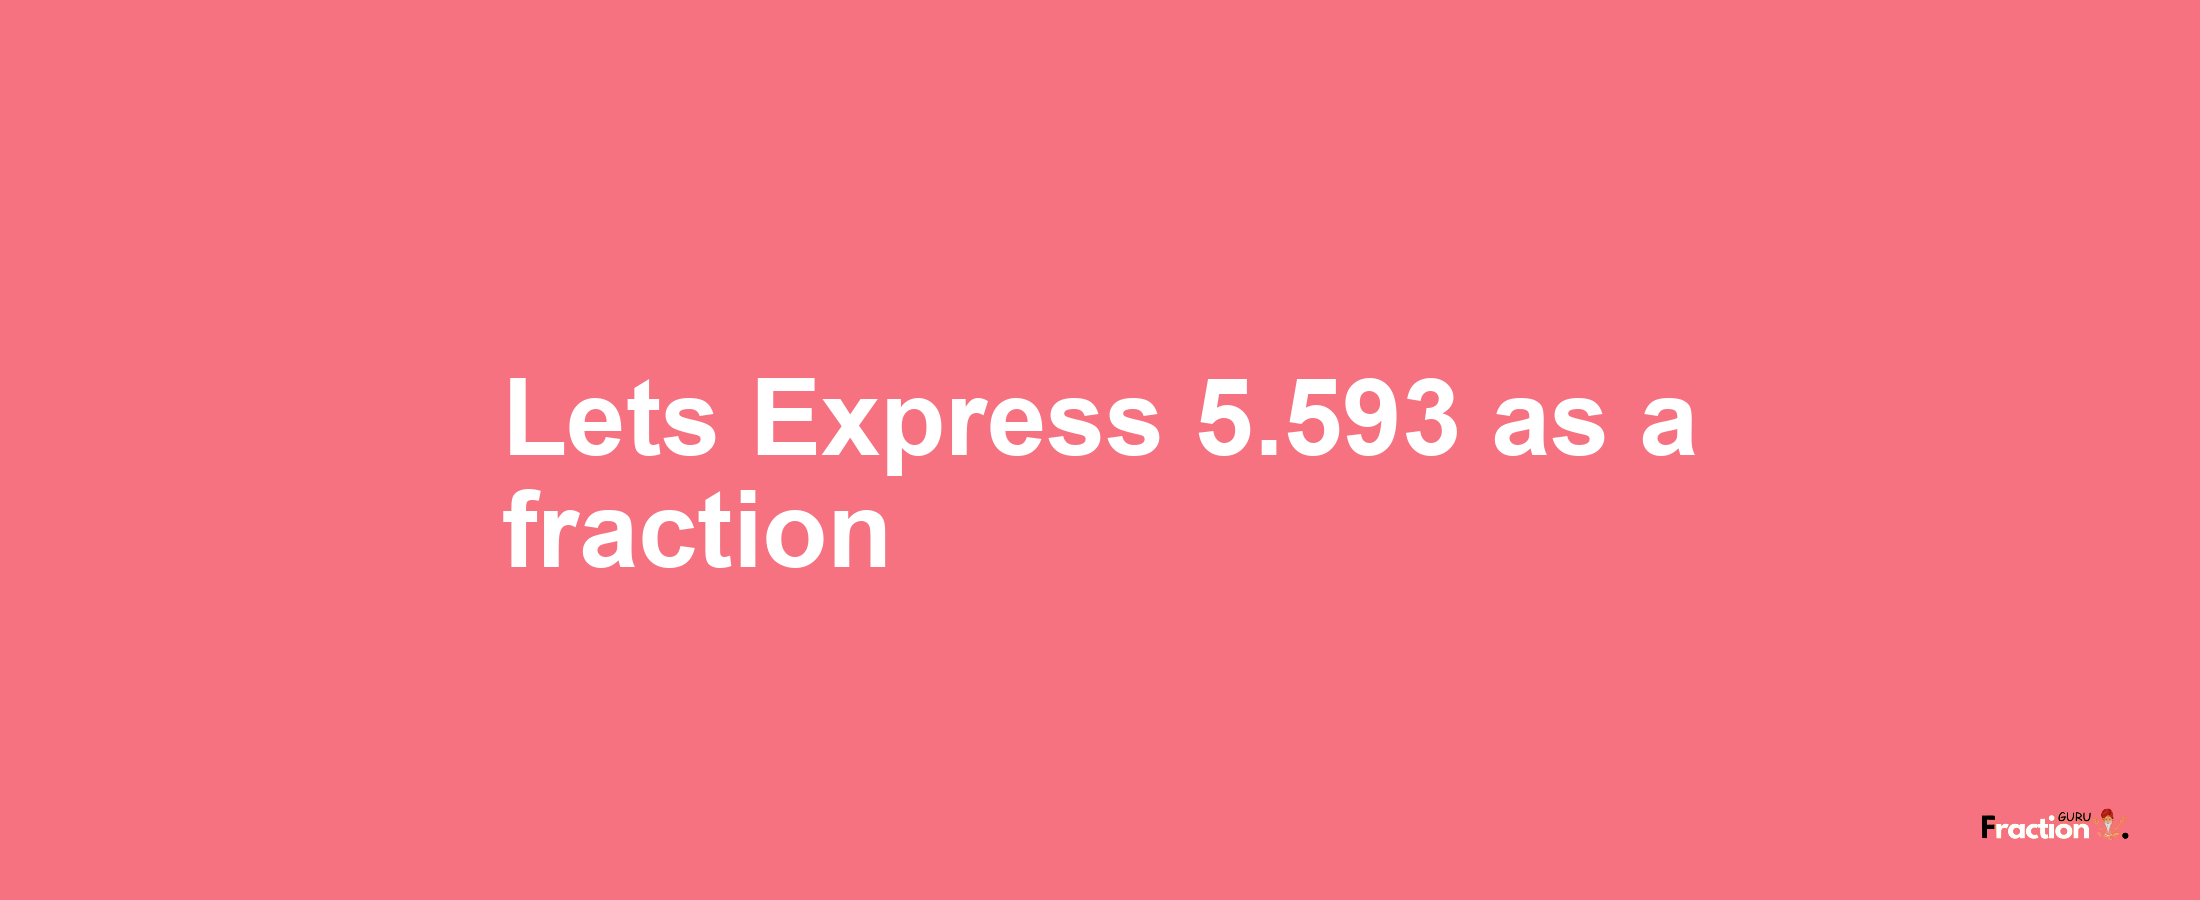 Lets Express 5.593 as afraction